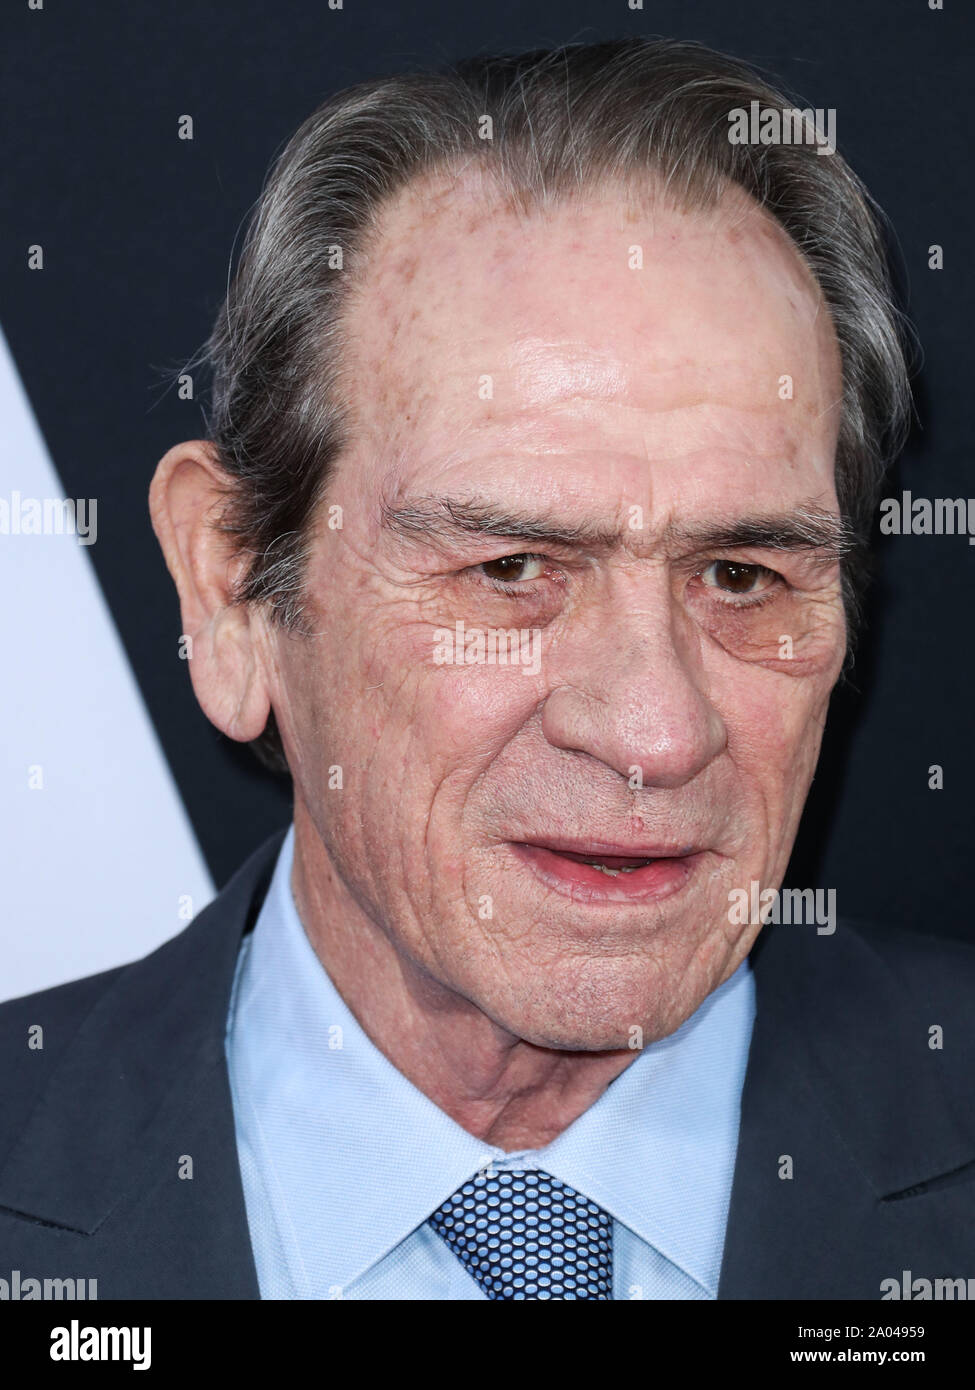 HOLLYWOOD, LOS ANGELES, CALIFORNIA, USA - SEPTEMBER 18: Actor Tommy Lee Jones arrives at the Los Angeles Premiere Of 20th Century Fox's 'Ad Astra' held at ArcLight Cinemas Hollywood Cinerama Dome on August 18, 2019 in Hollywood, Los Angeles, California, United States. (Photo by Xavier Collin/Image Press Agency) Stock Photo